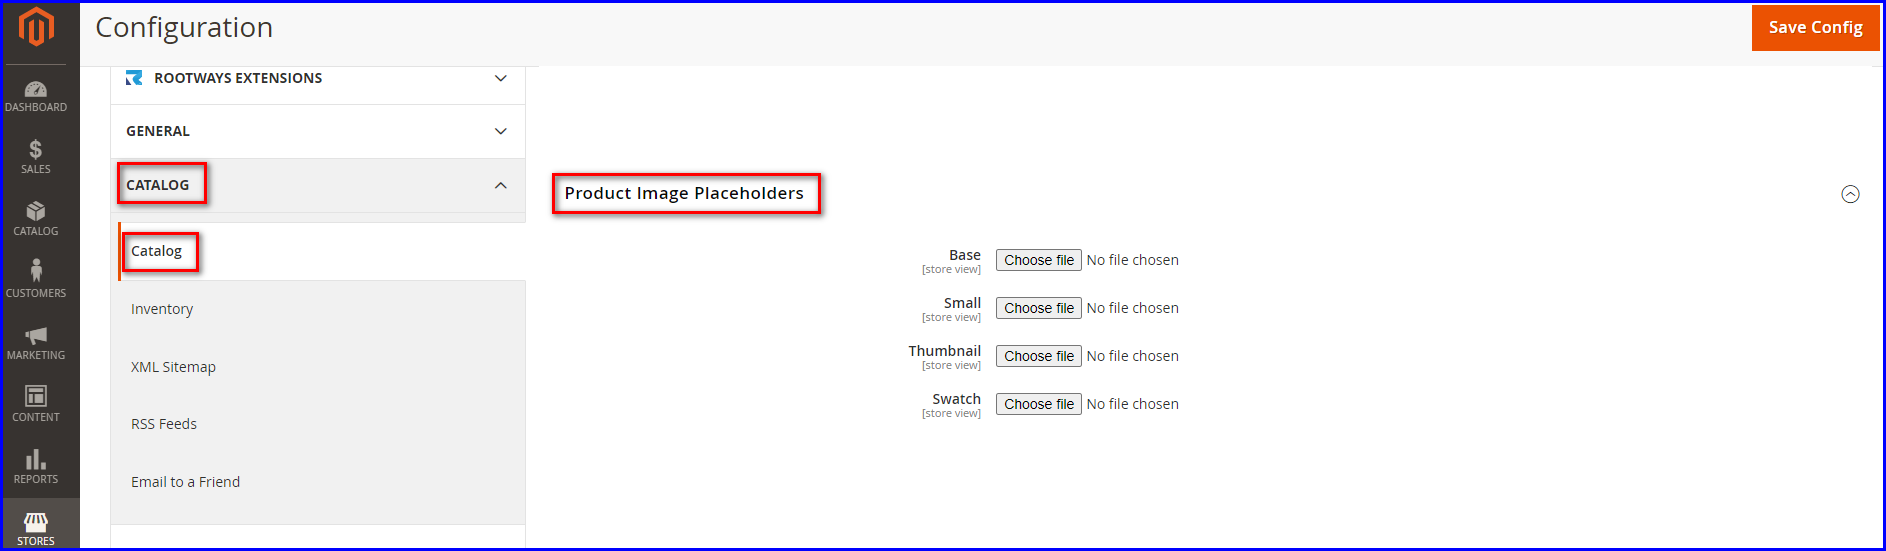 Uploading a Product Image Placeholder in Magento 2